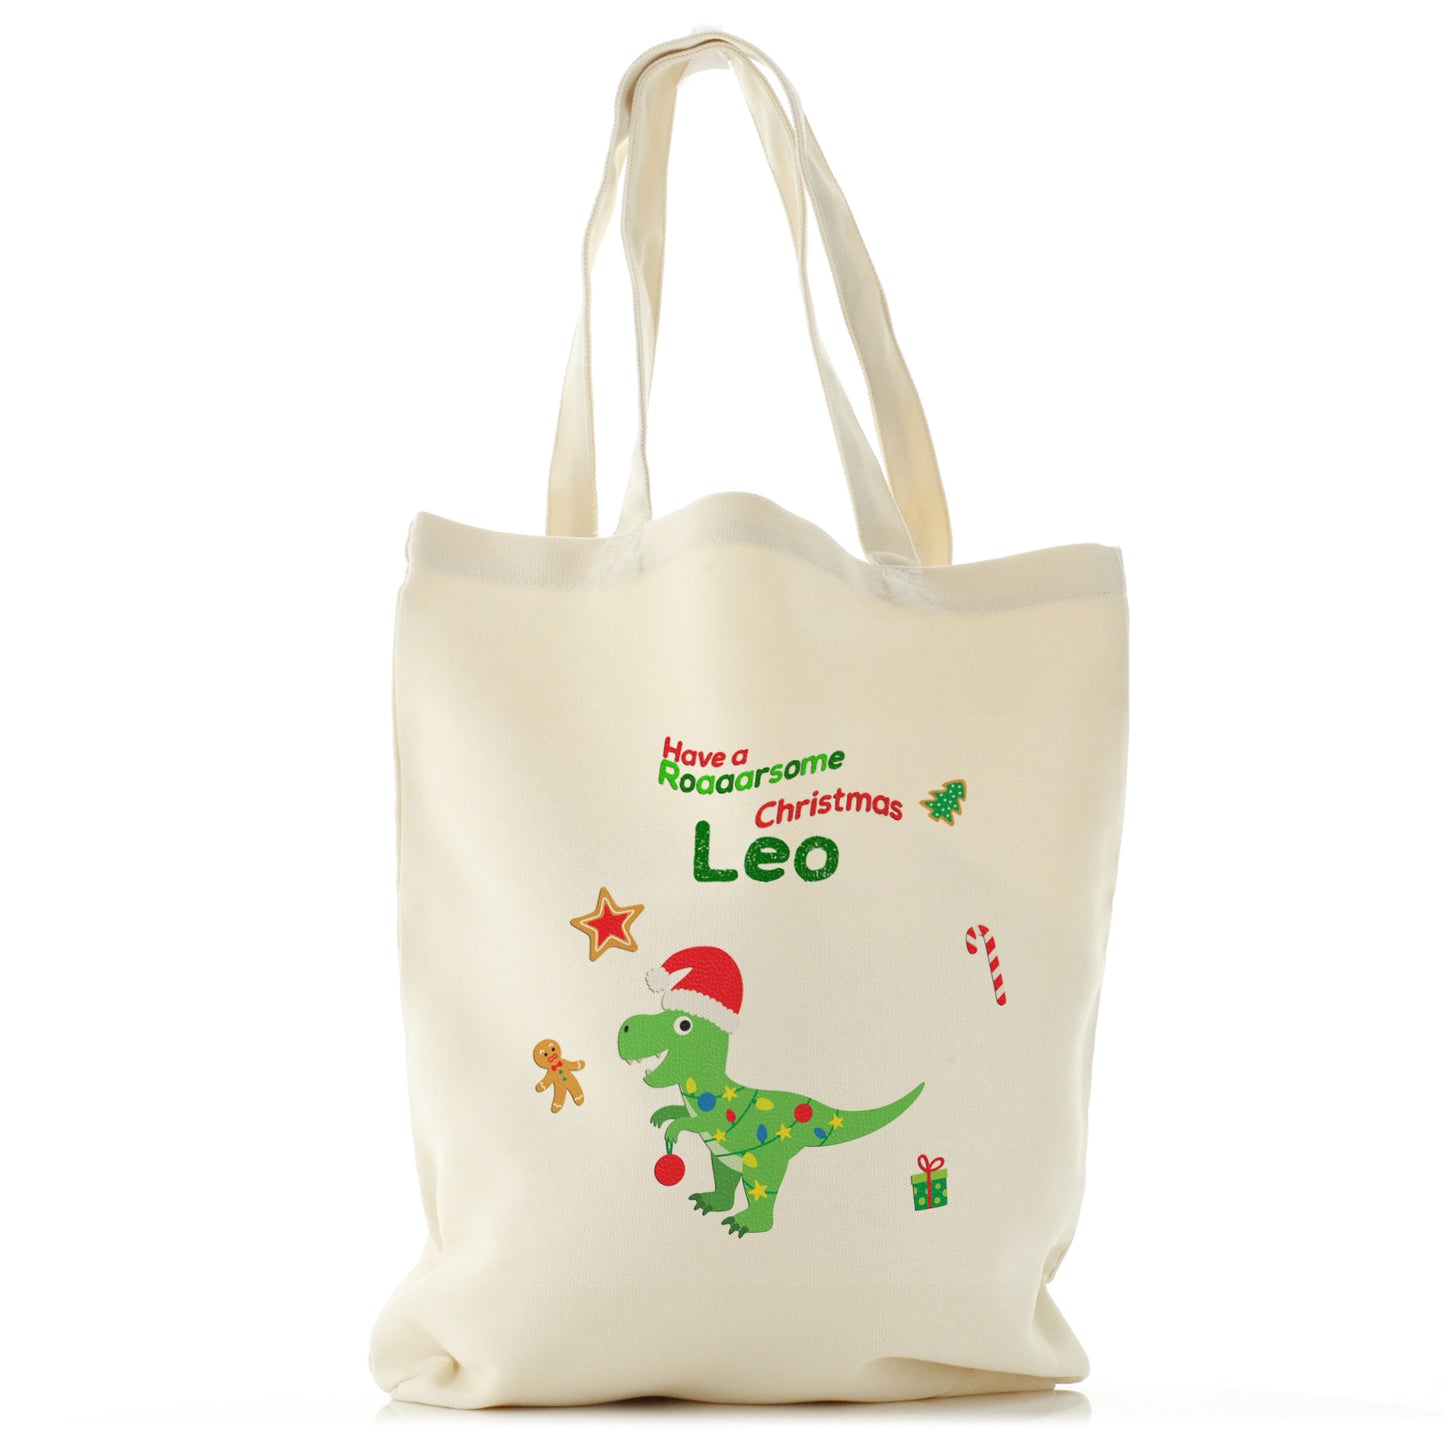 Personalised Canvas Tote Bag with Dino Text and Christmas Lights on Green Dinosaur